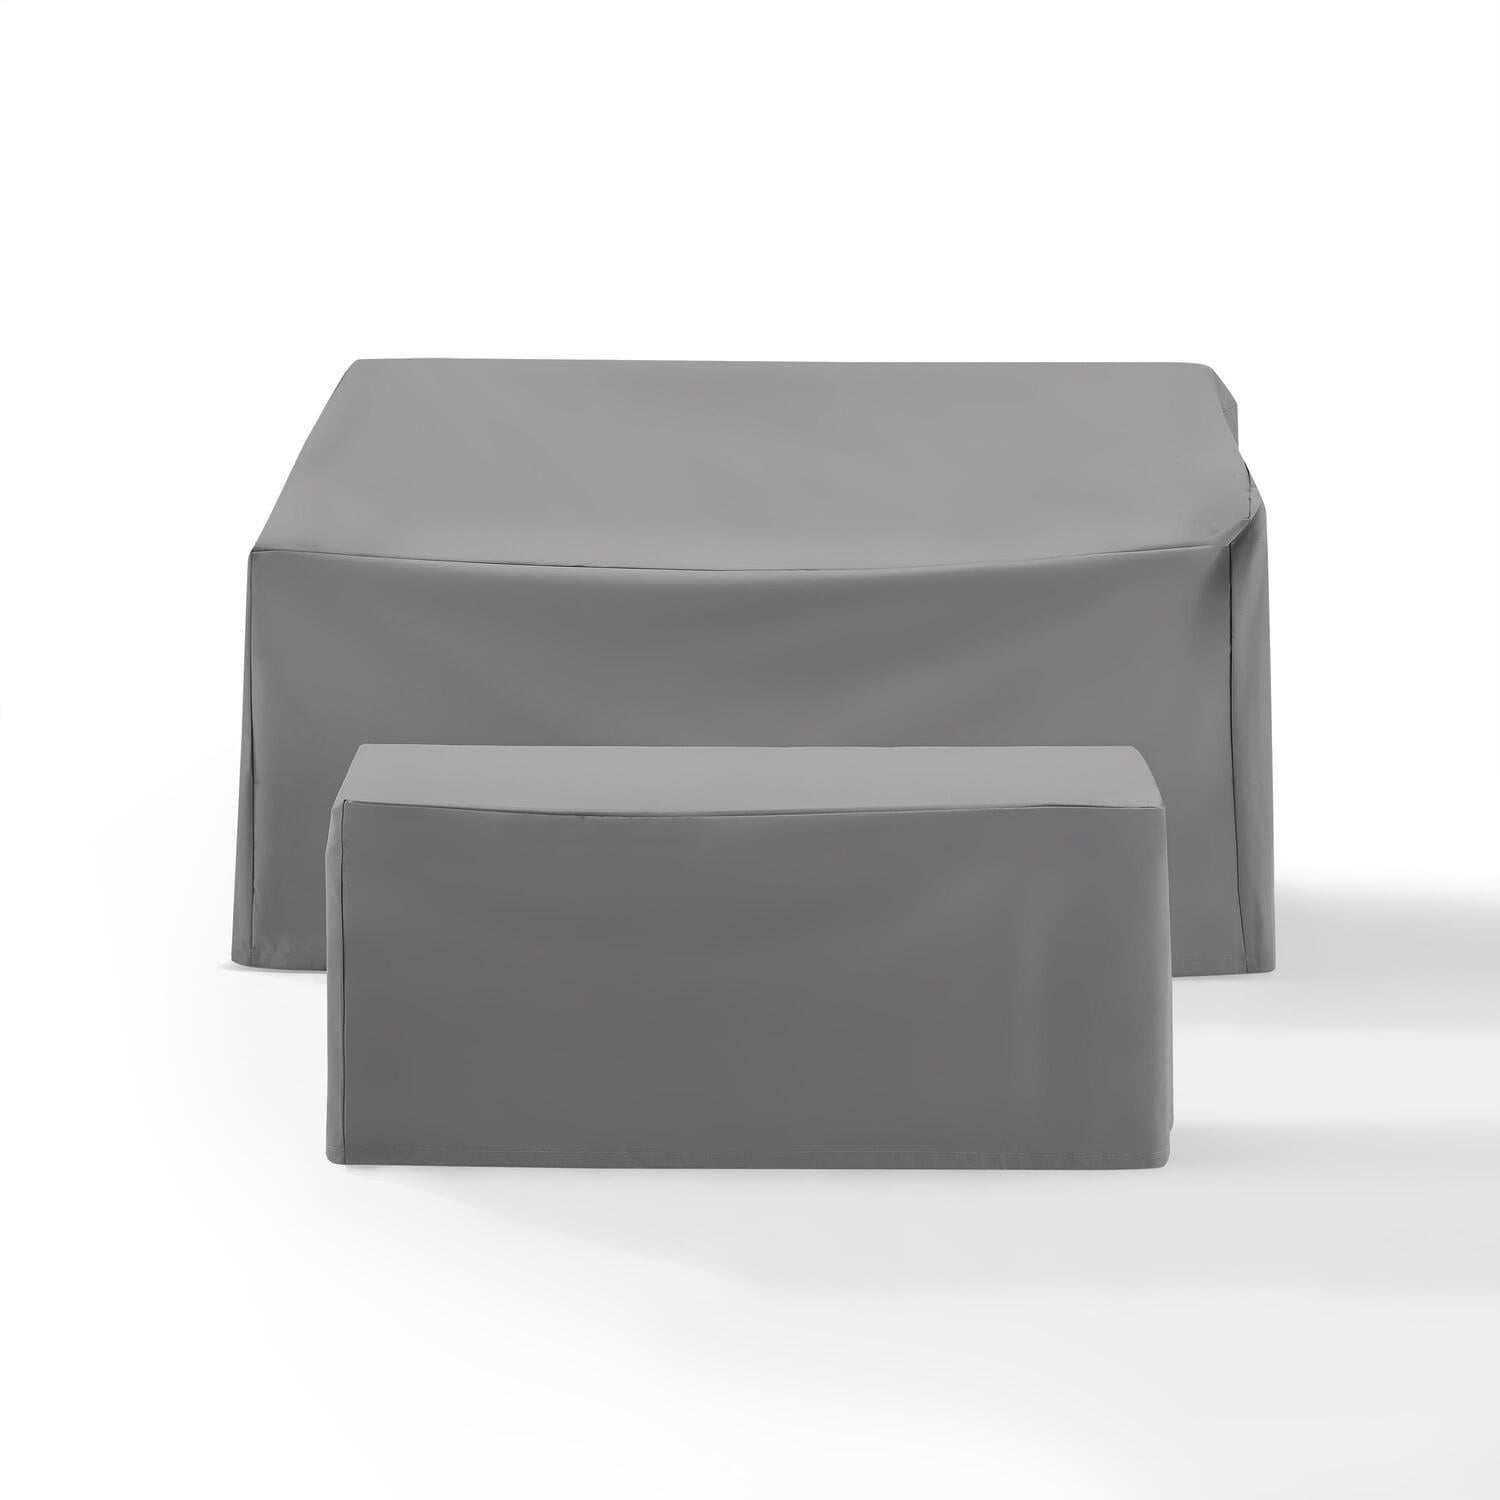 Crosley Patio Coffee Table Cover in Gray 